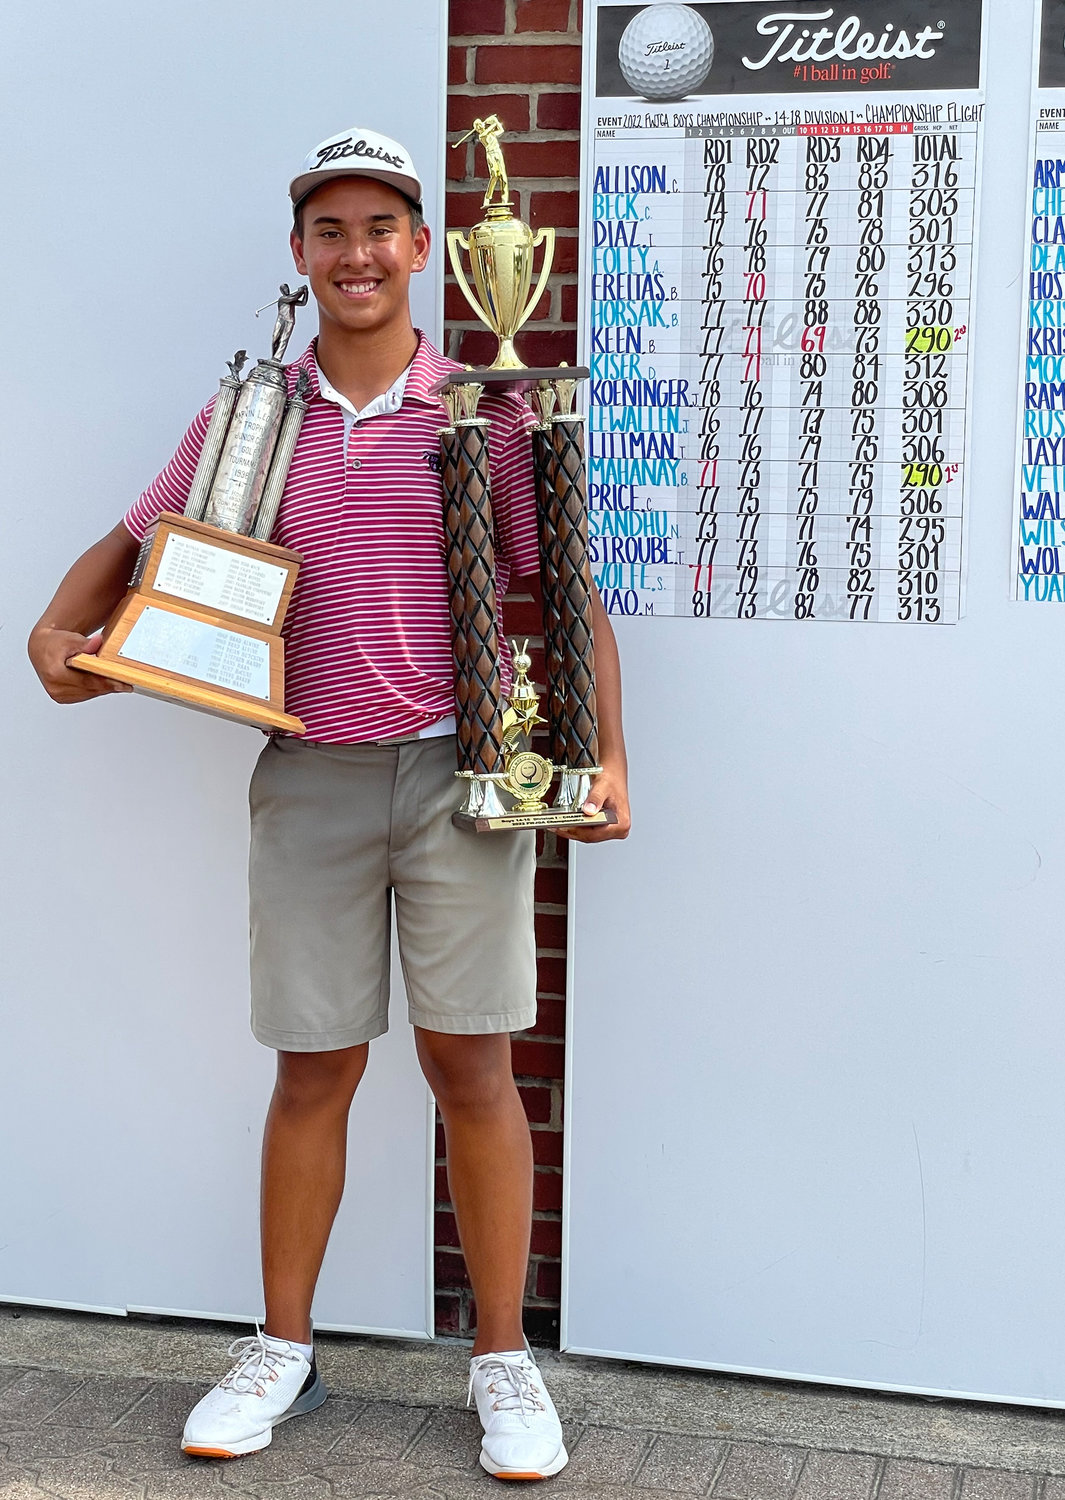 Aledo's Braylon Mahaney holds two trophies after winning the Fort Worth Boys Junior Golf Championship. The one on the right is for winning this year's tournament and the one on the left has the names of every winner since the tournament started in 1936.